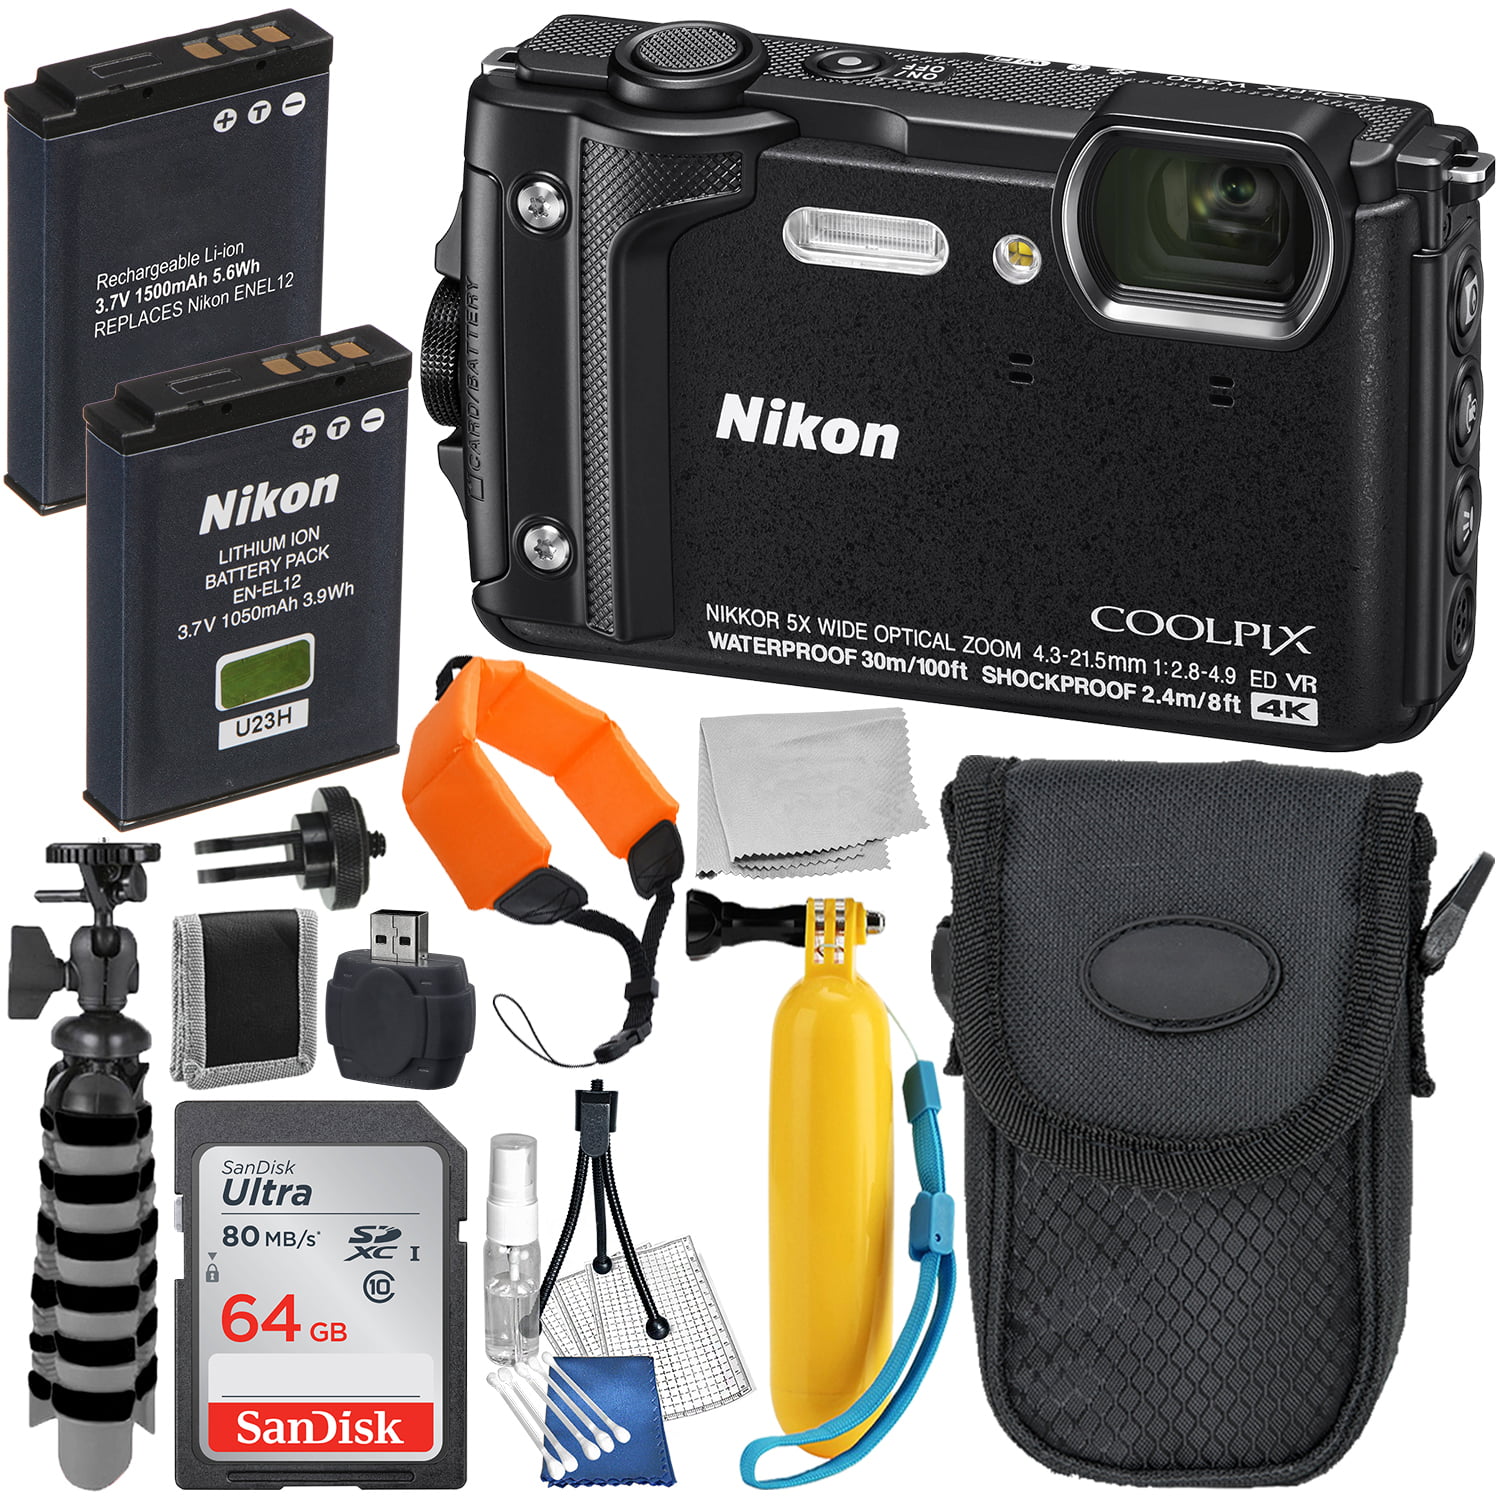 Nikon COOLPIX W300 Digital Camera (Black) with Deluxe Accessory